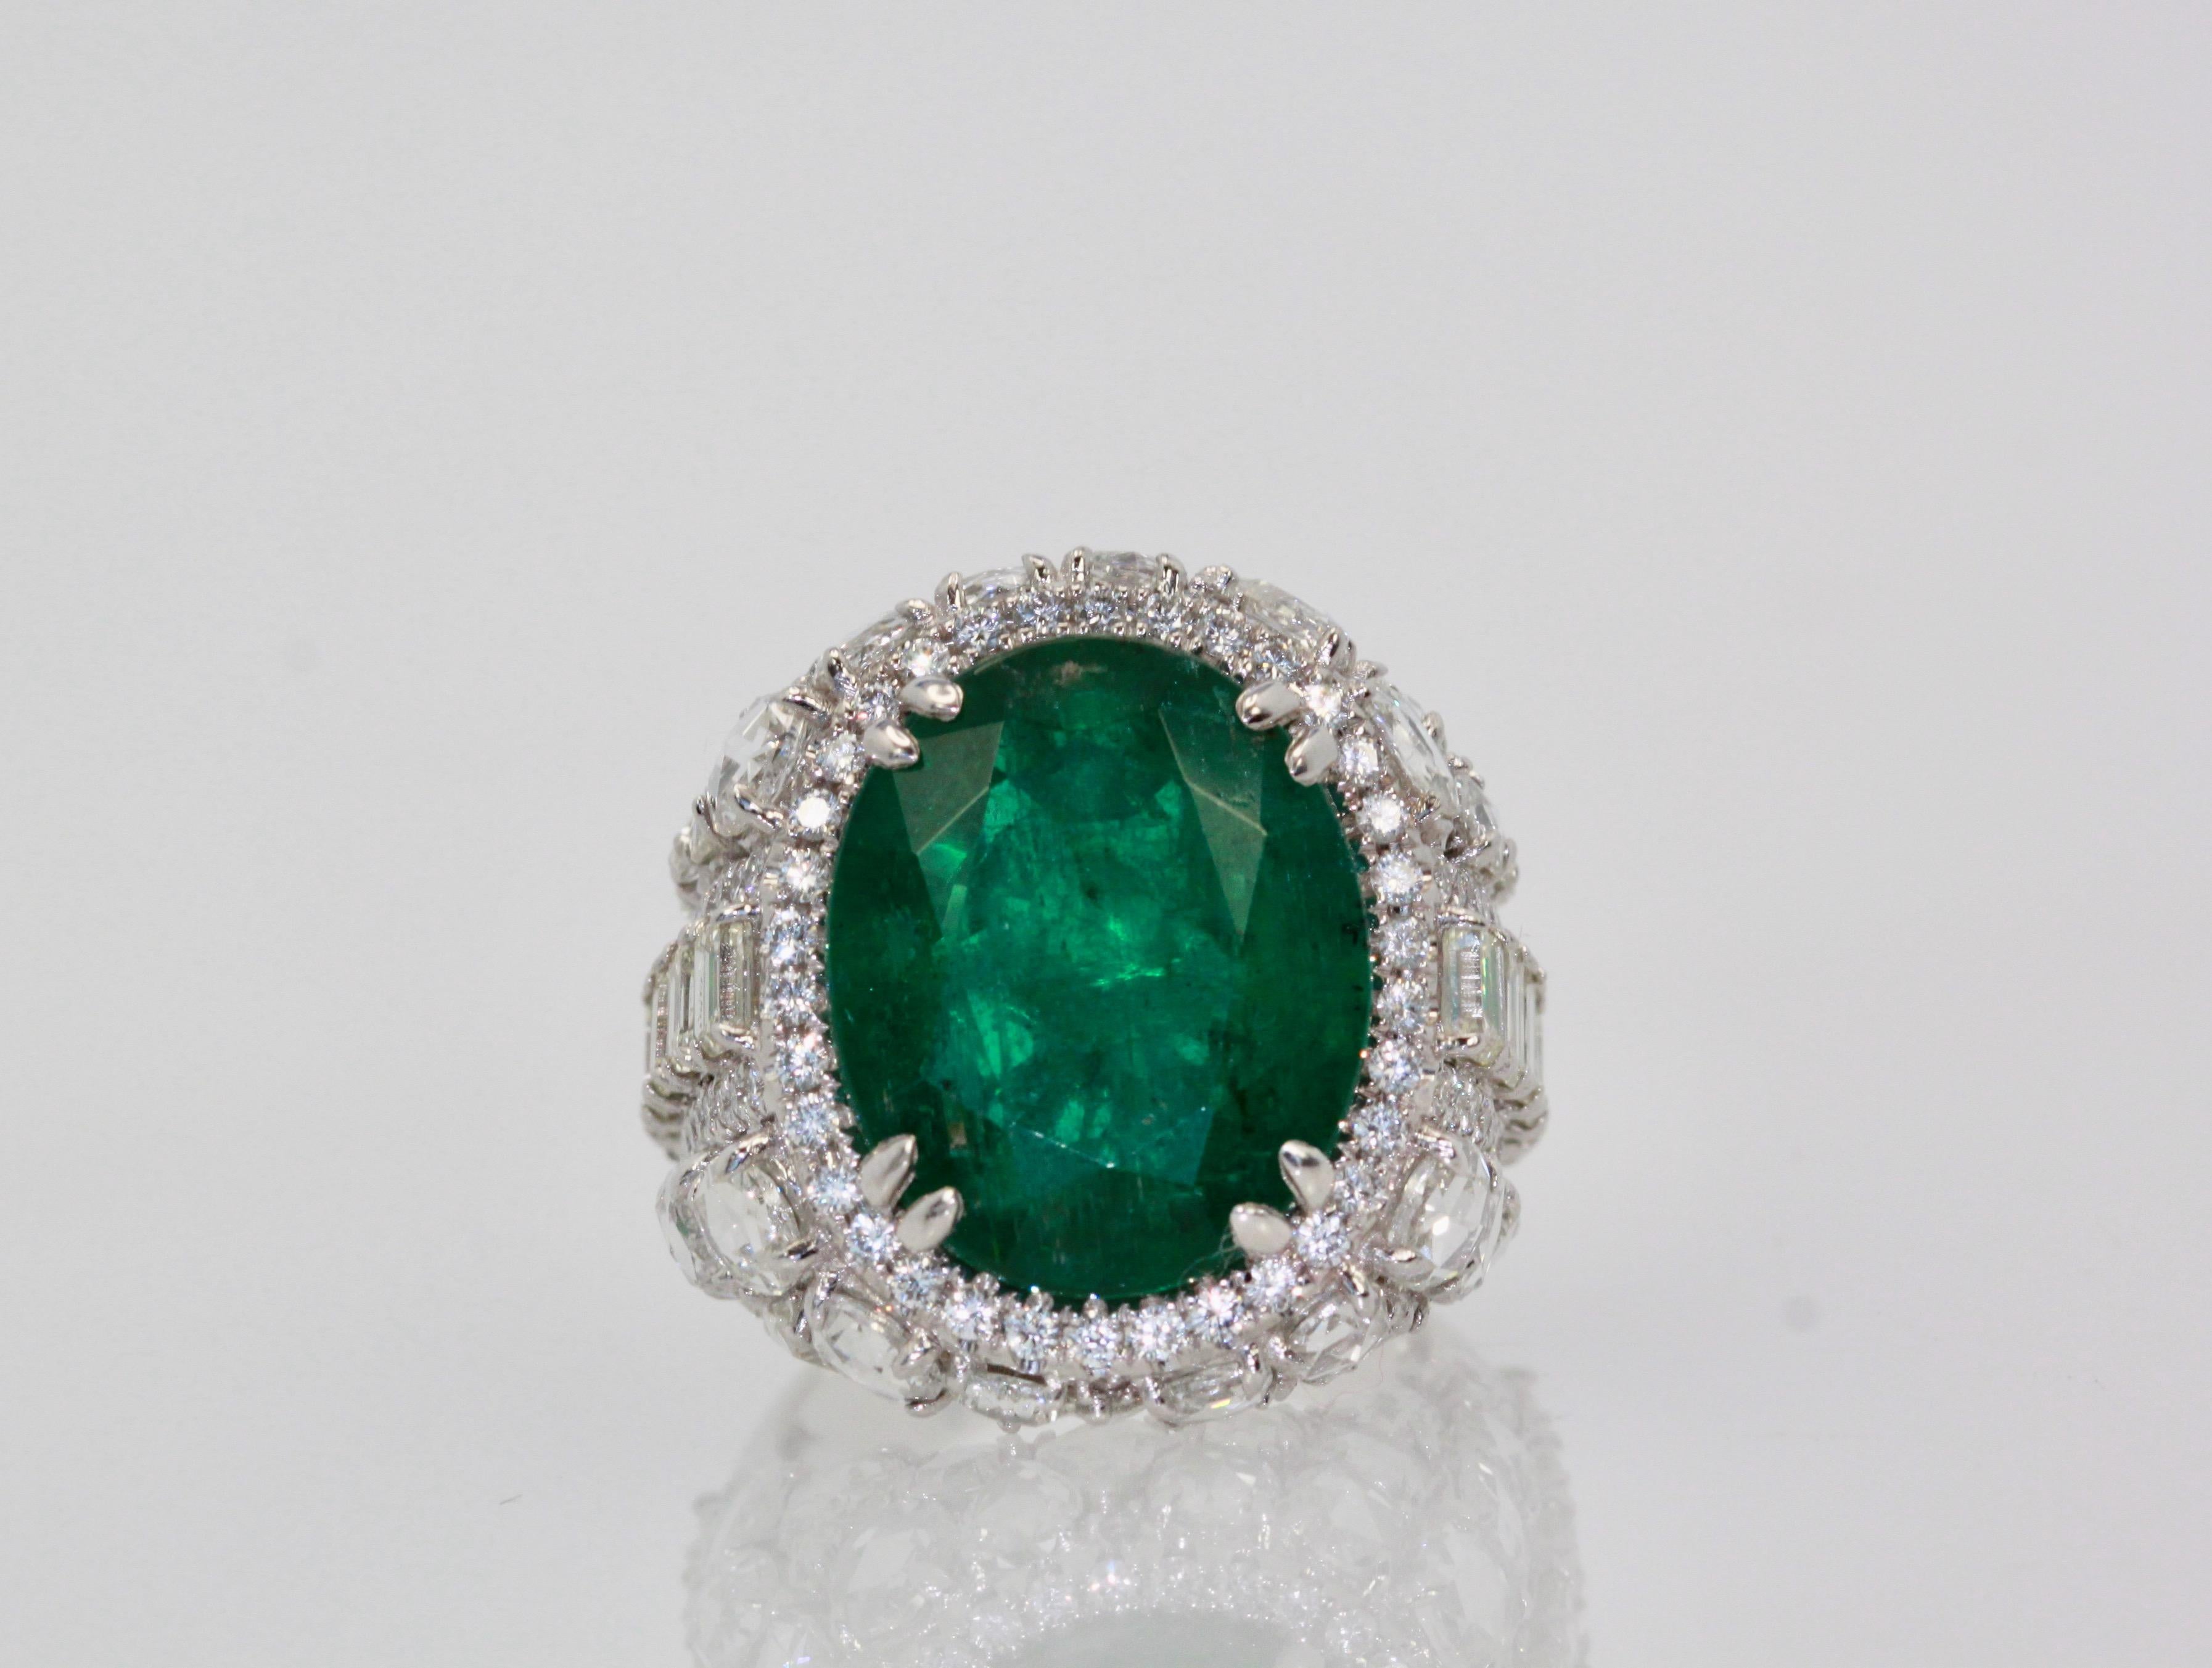 This oval Emerald weights in at 12.25 carats and is a gorgeous Emerald Green with transparency.  The Diamonds weigh in at 8.85 Carats and the mount is exceptional the Diamonds are VS1-VS2 and G-J in color.  This is a bombe mount.  The shoulders of